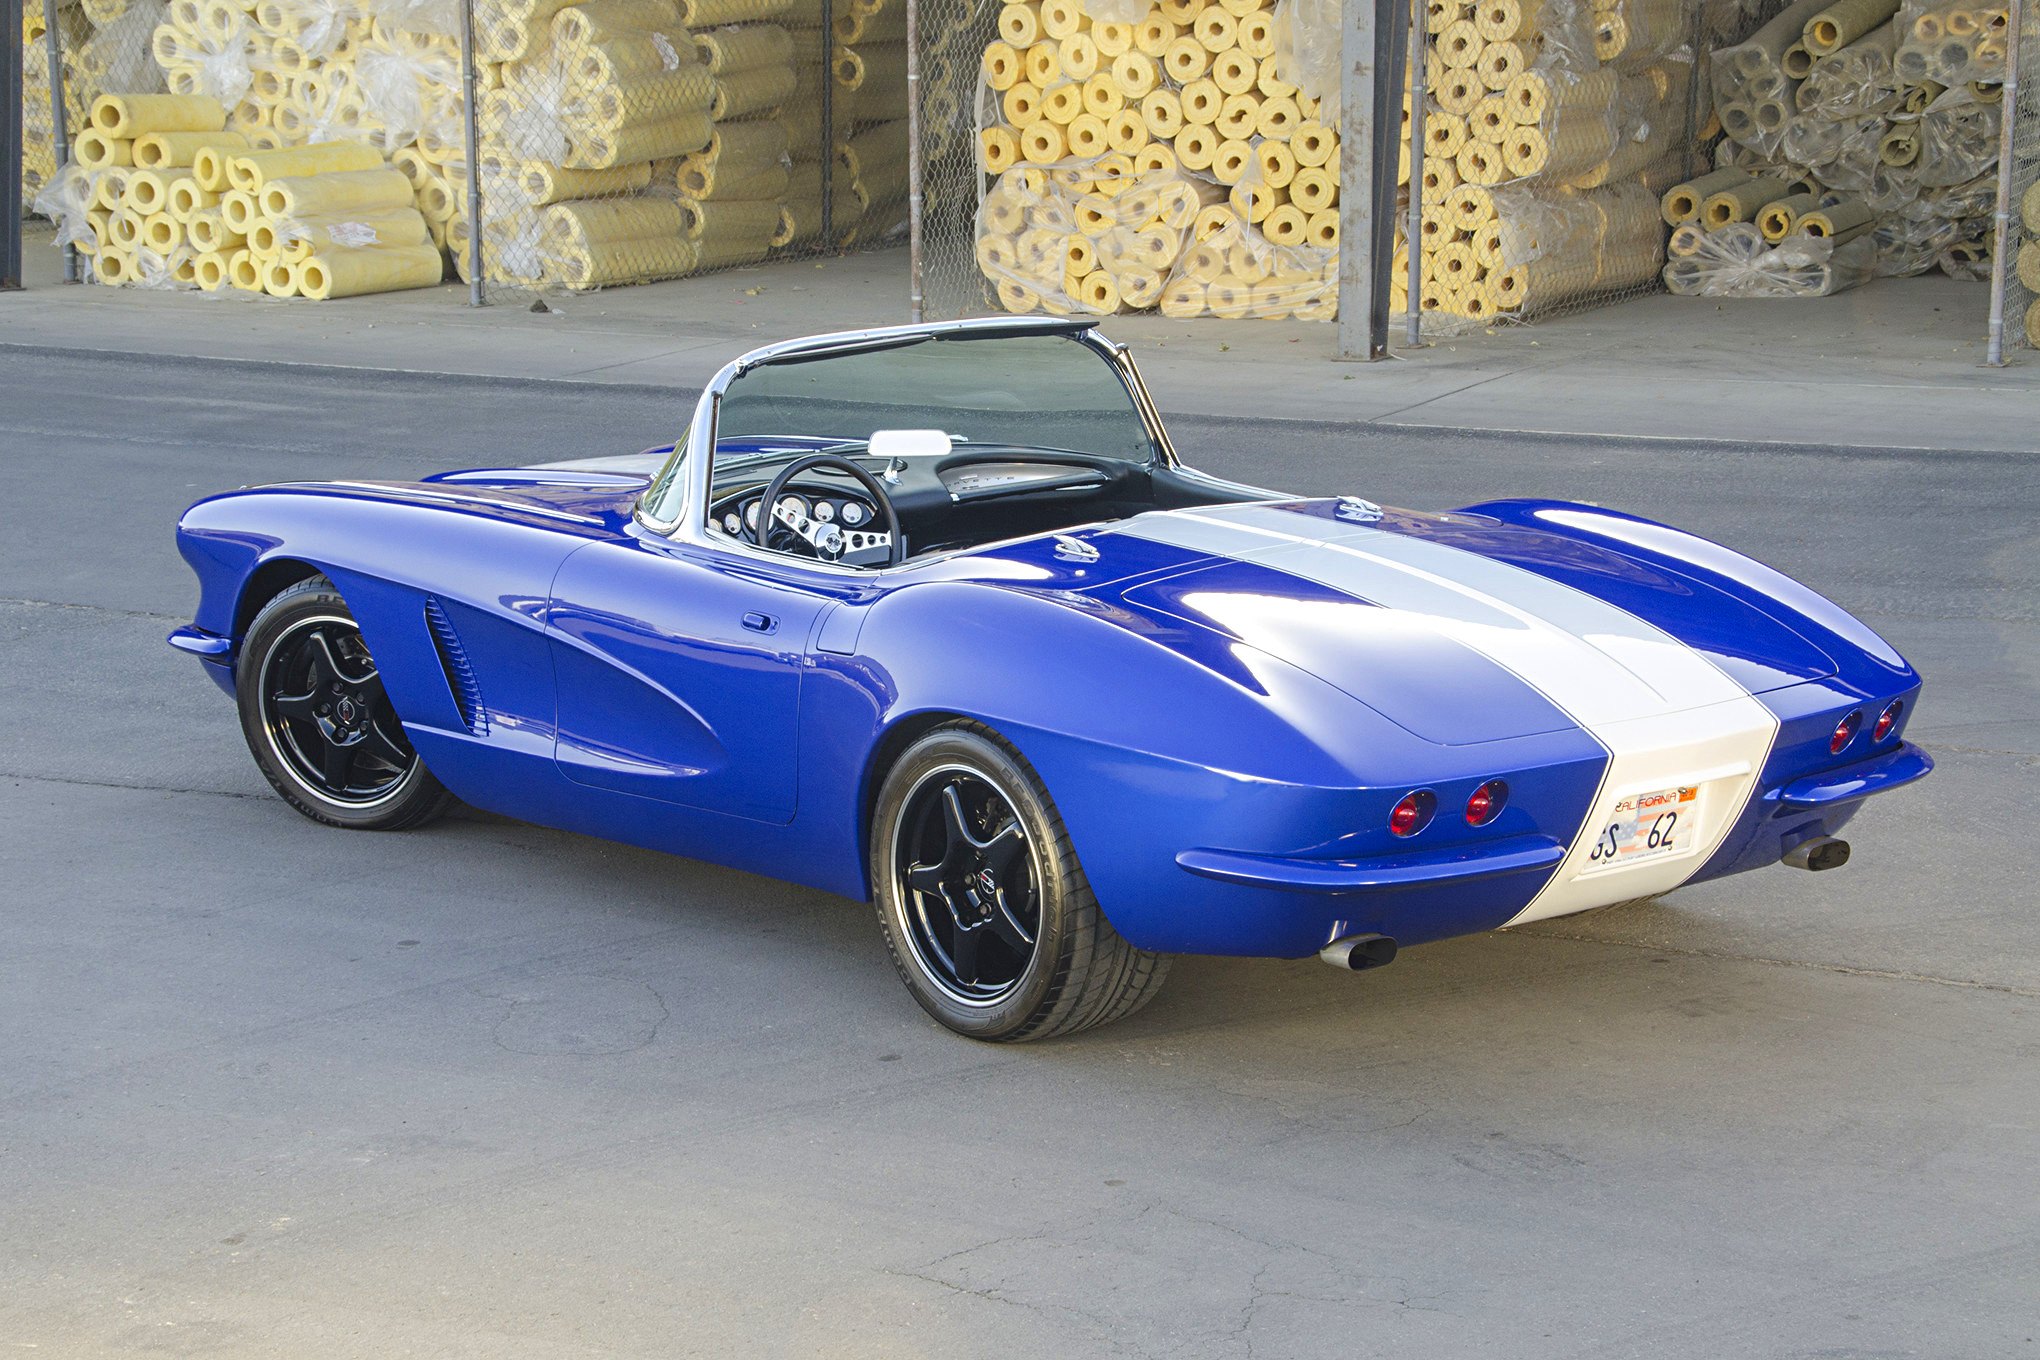 Blue Convertible Chevy Corvette with Aftermarket Side Scoops - Photo by Steve Temple